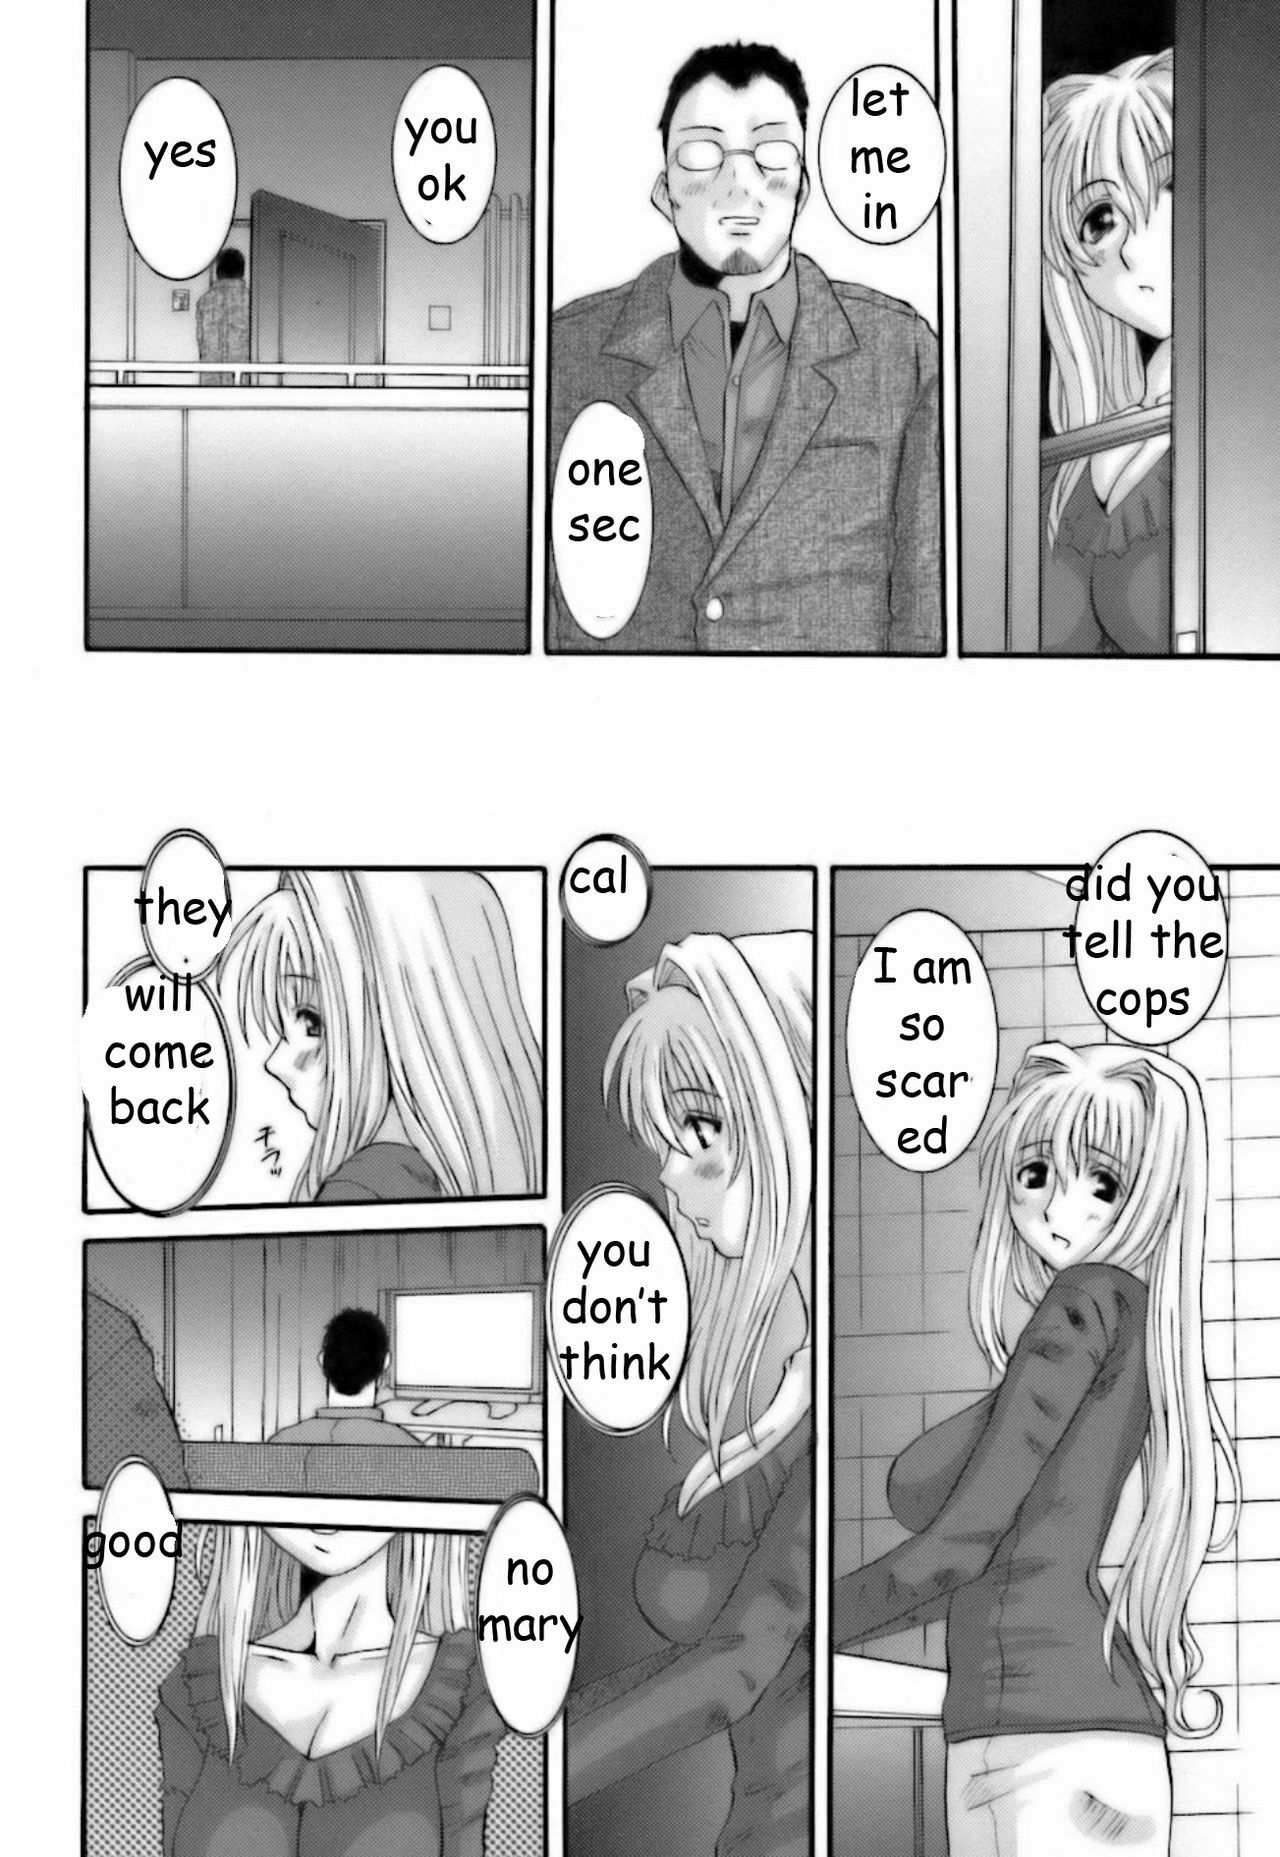 Forced Sister 1-2 [English] [Rewrite] [EZ Rewriter] page 18 full